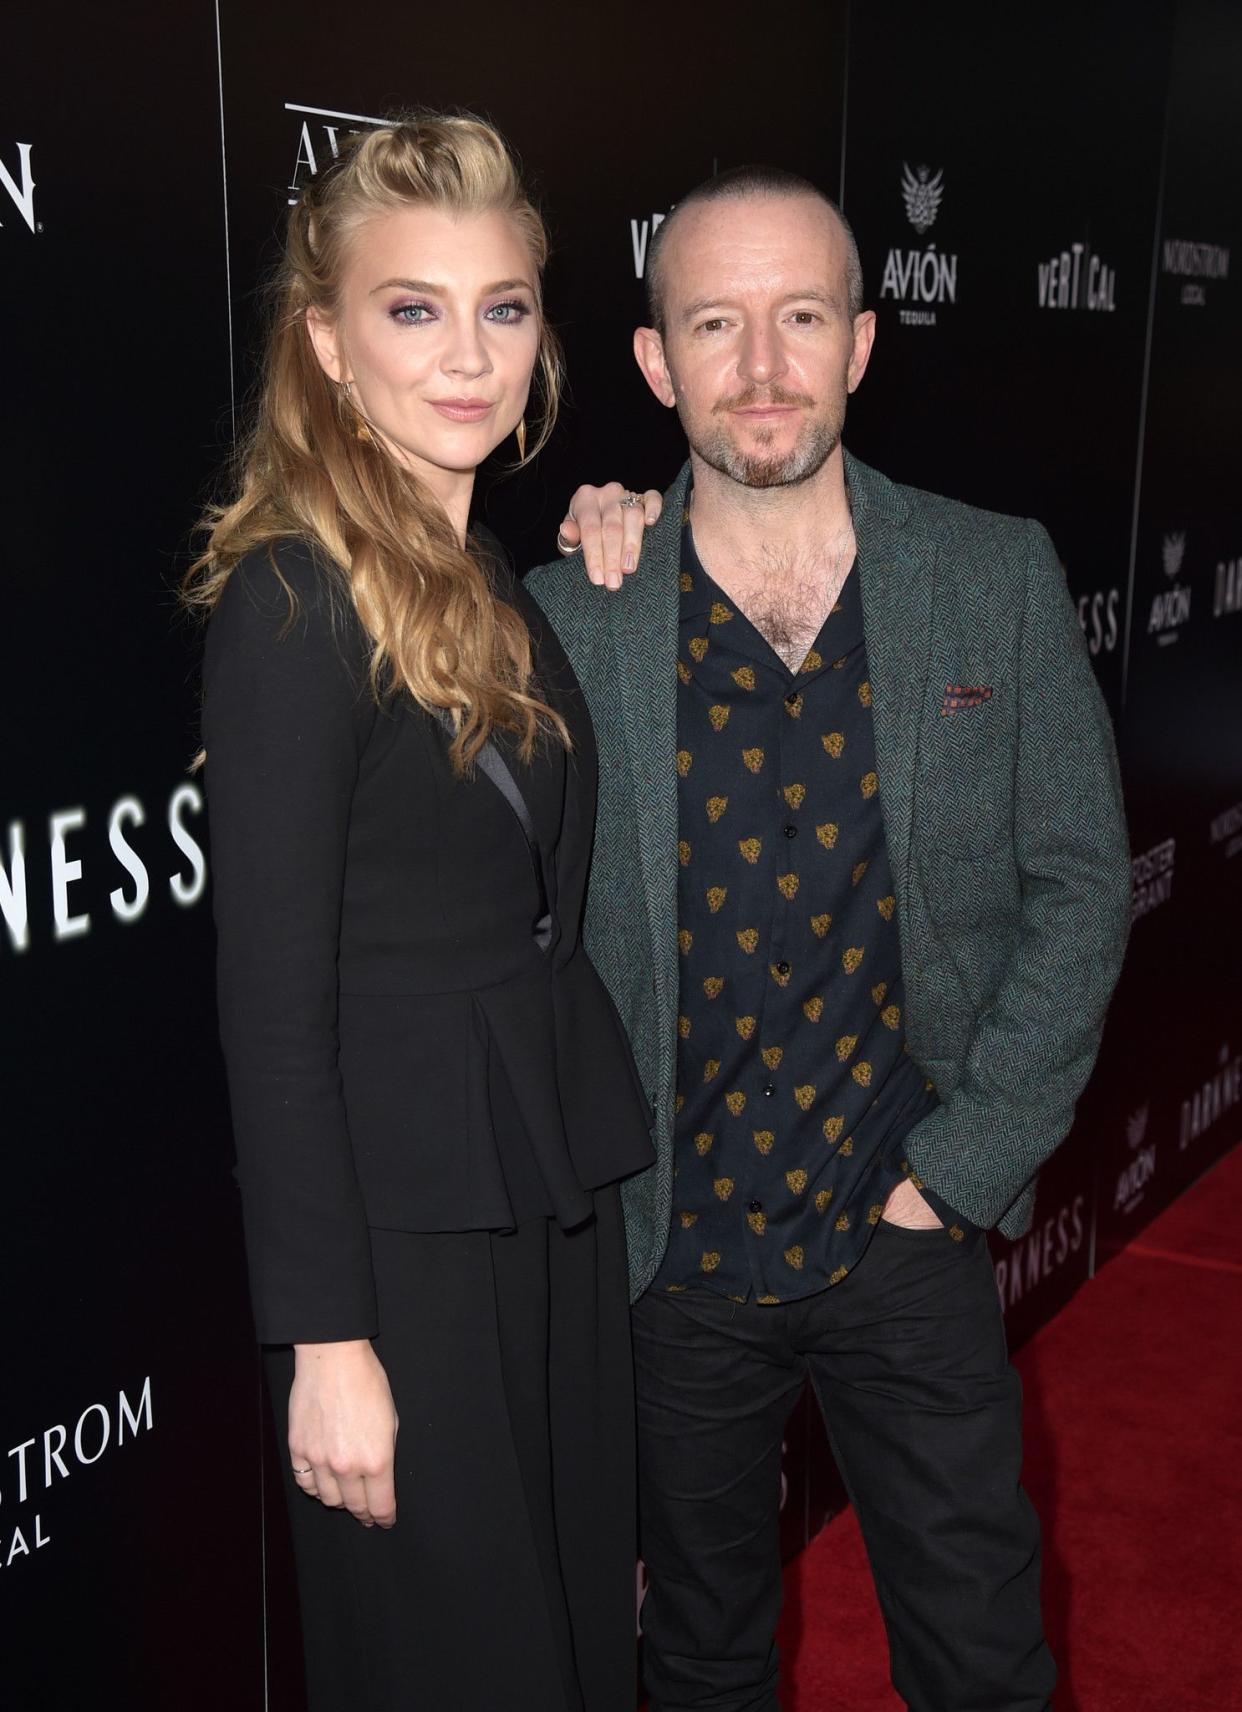 News of “Game of Thrones” star Natalie Dormer ending her relationship with her fiance and boyfriend of 11 years, Anthony Byrne, was revealed Nov. 21, 2018 in New Statesman magazine; the publication referred to Byrne as Dormer’s “former partner”. The two ended their relationship over the summer. New Statesman went on to say that “Dormer only has positive things to say about Byrne.”